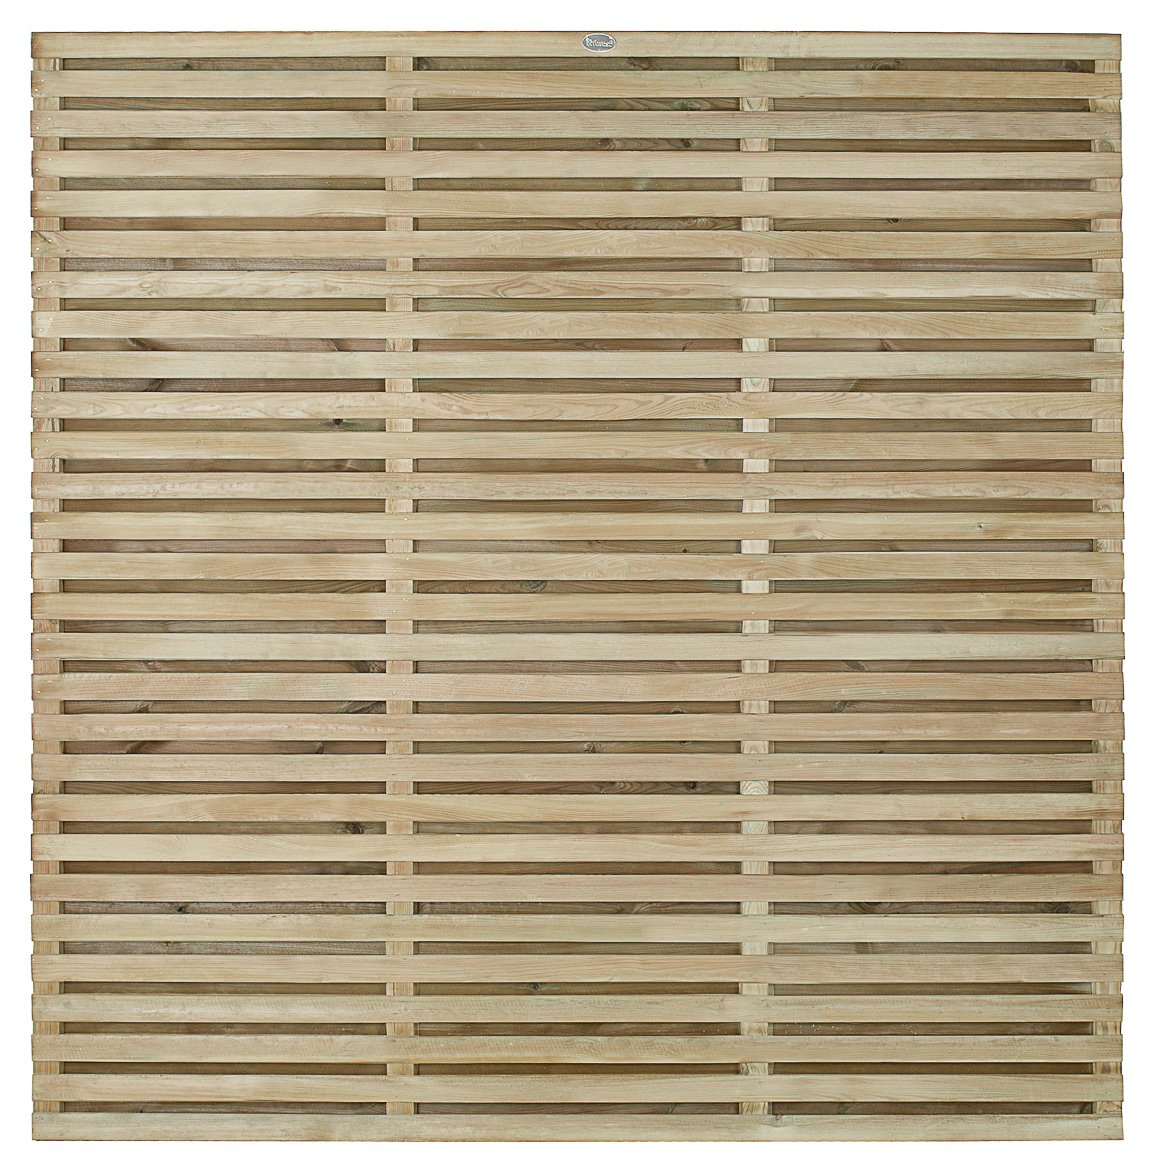 Forest Garden 6x6 Double Slatted Panel x3